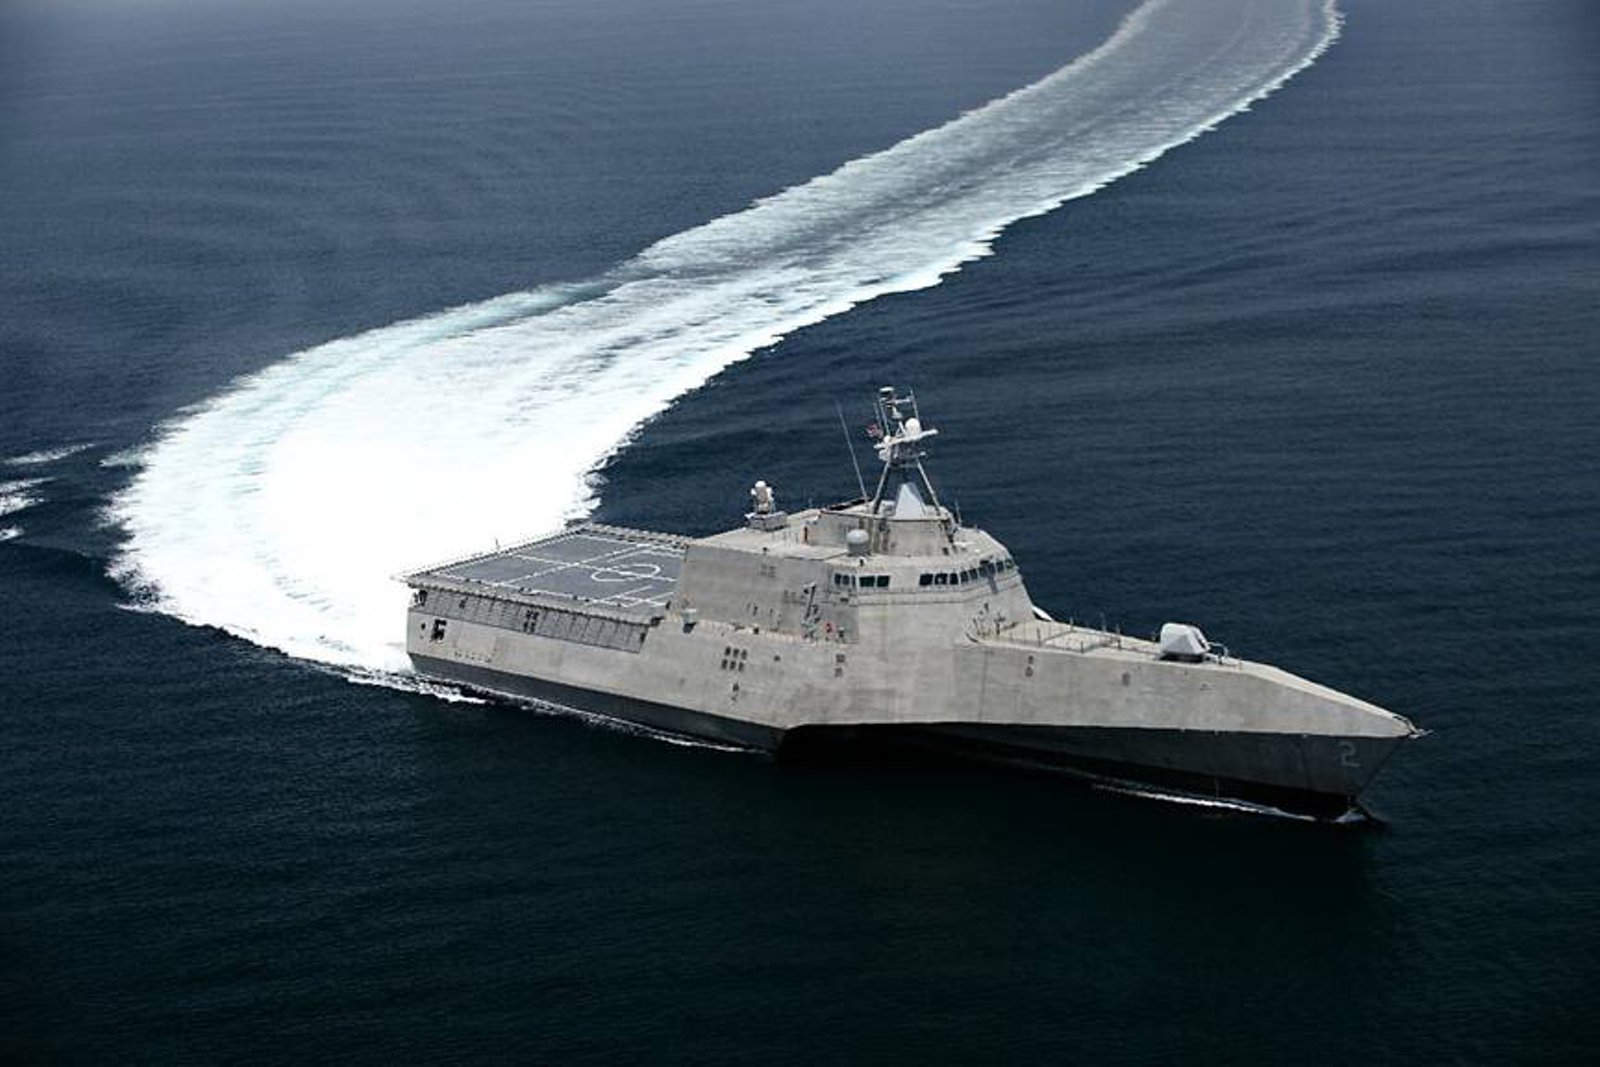 http://einarbb.blog.is/users/72/einarbb/img/uss_independence_1.jpg